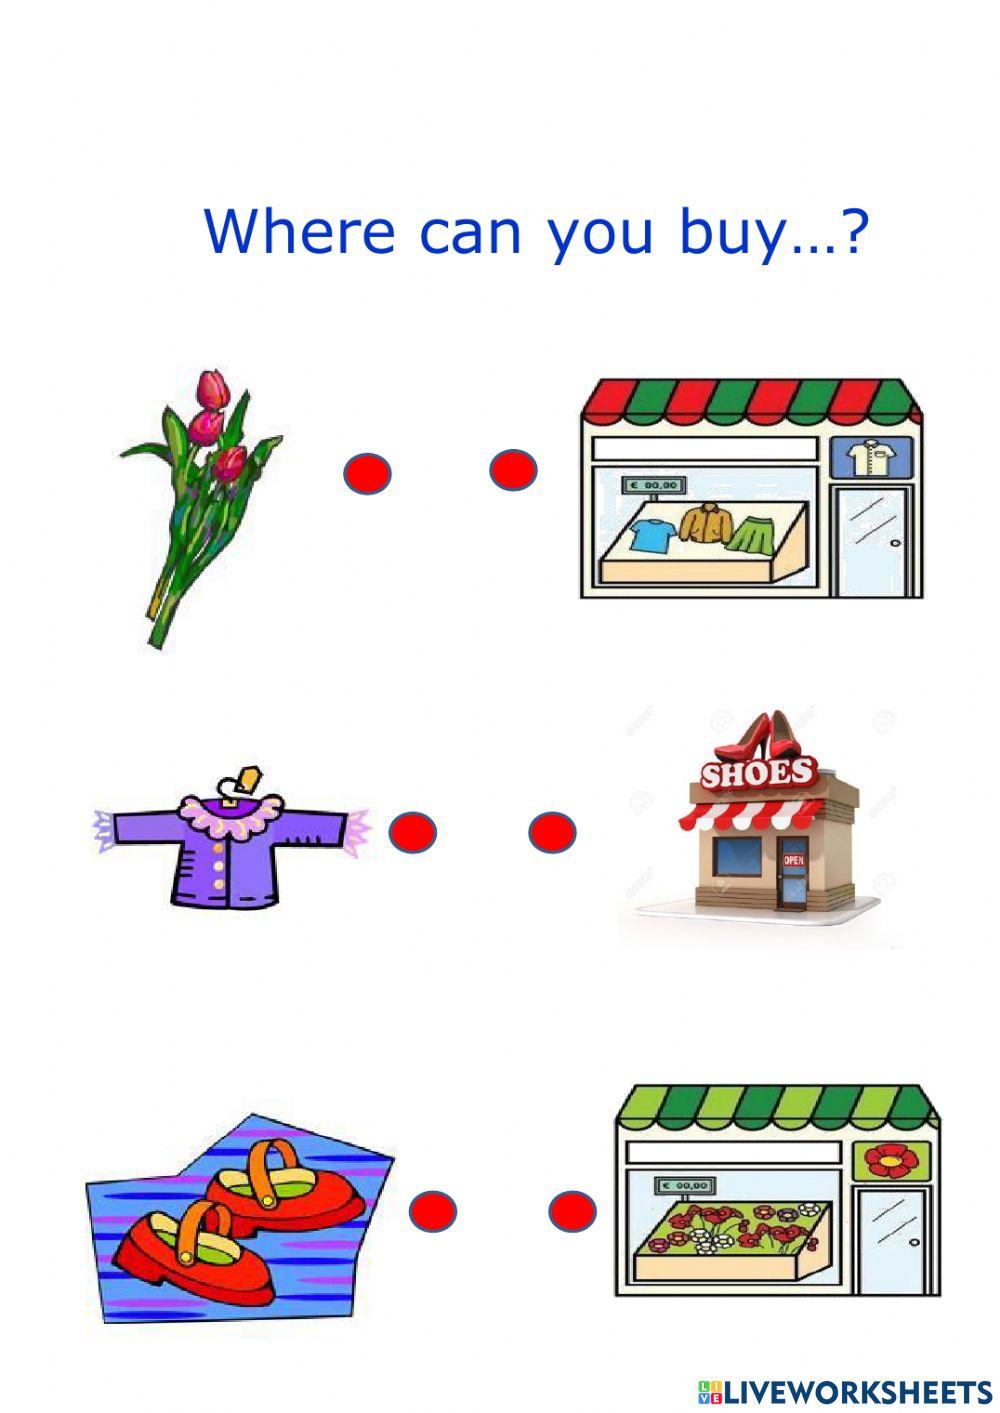 Where can you buy...?